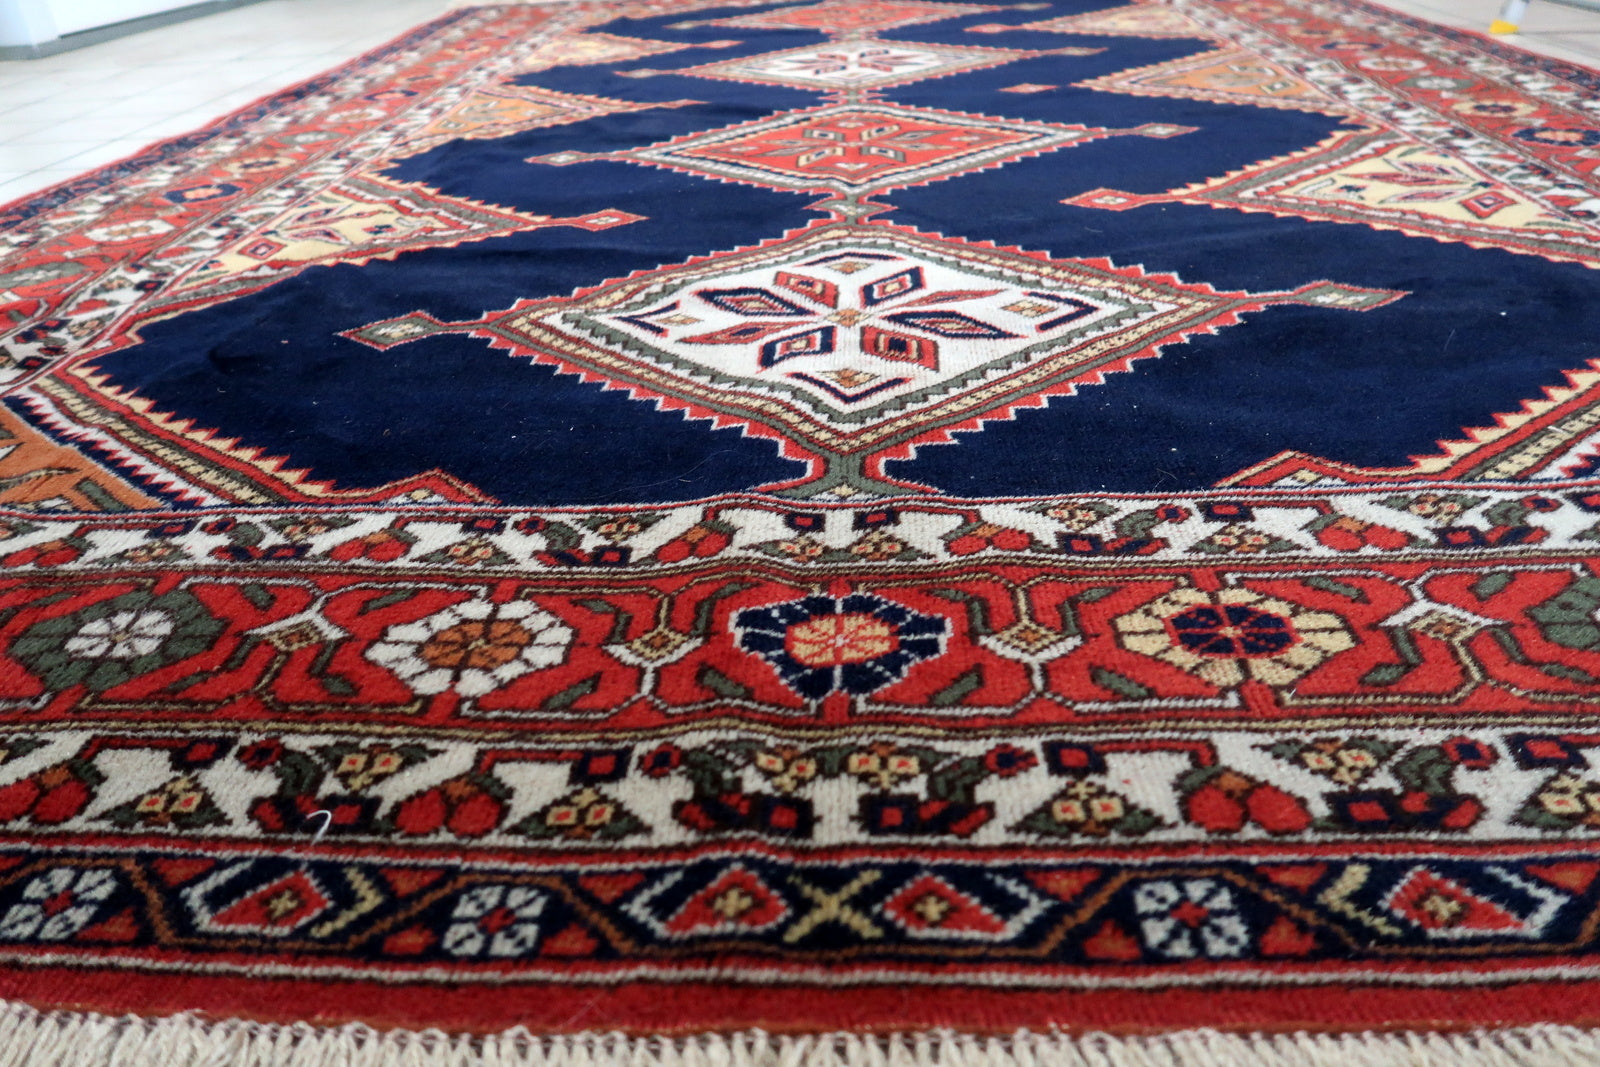 Artistic display of the rug as a focal point in a study, showcasing its timeless beauty and cultural heritage